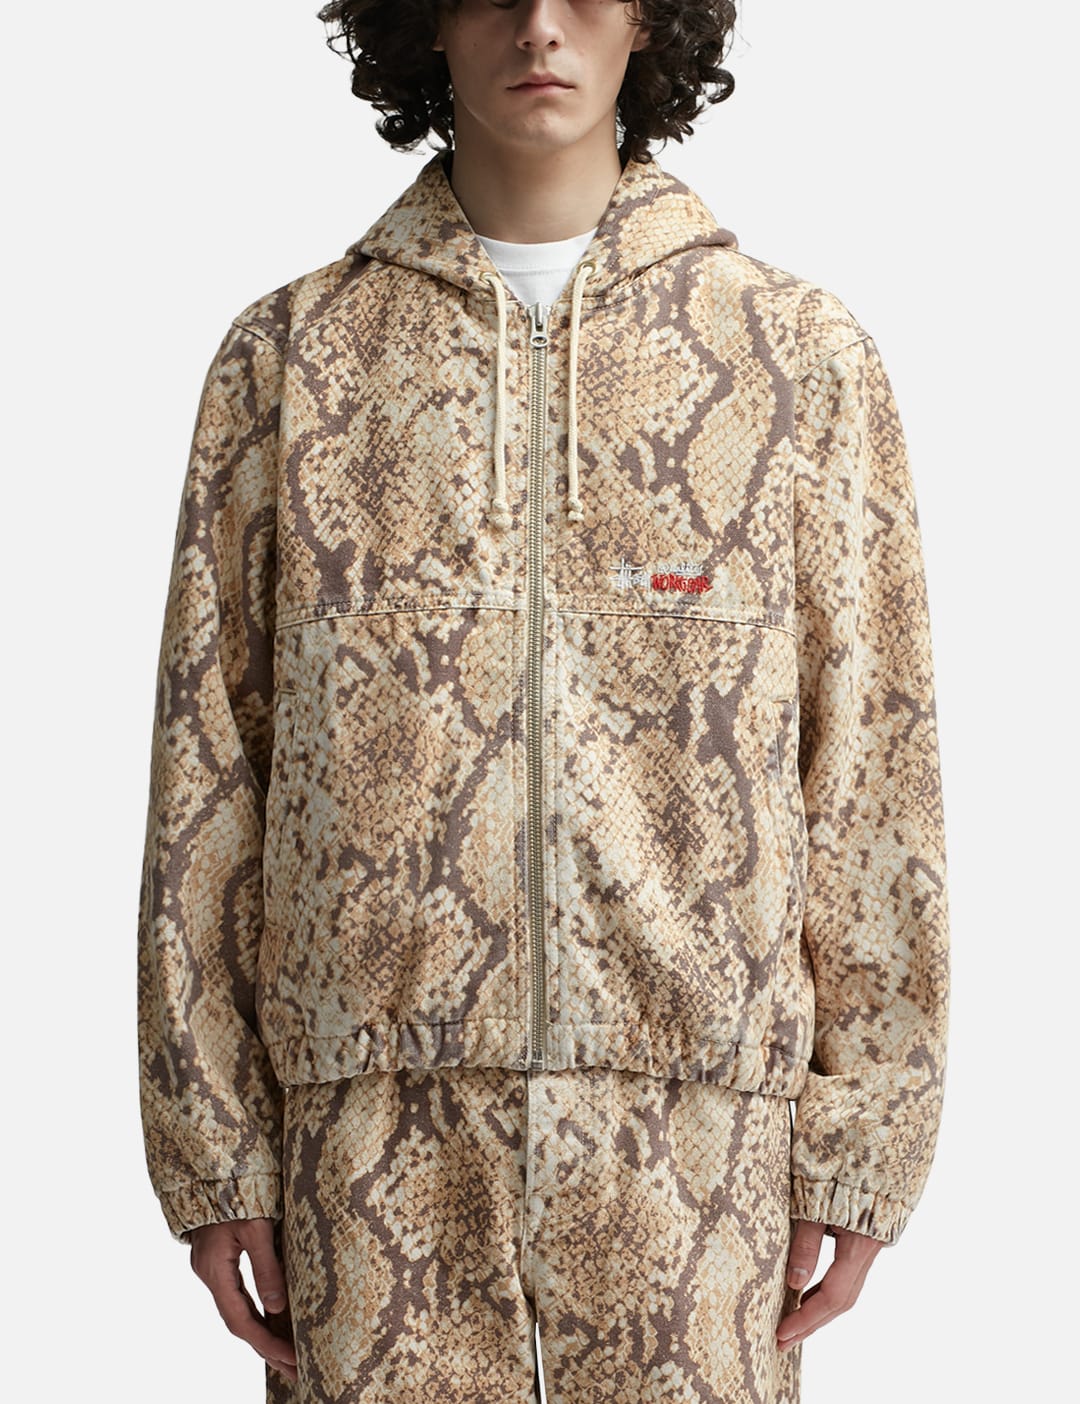 Stüssy - Work Jacket Insulated Canvas | HBX - Globally Curated